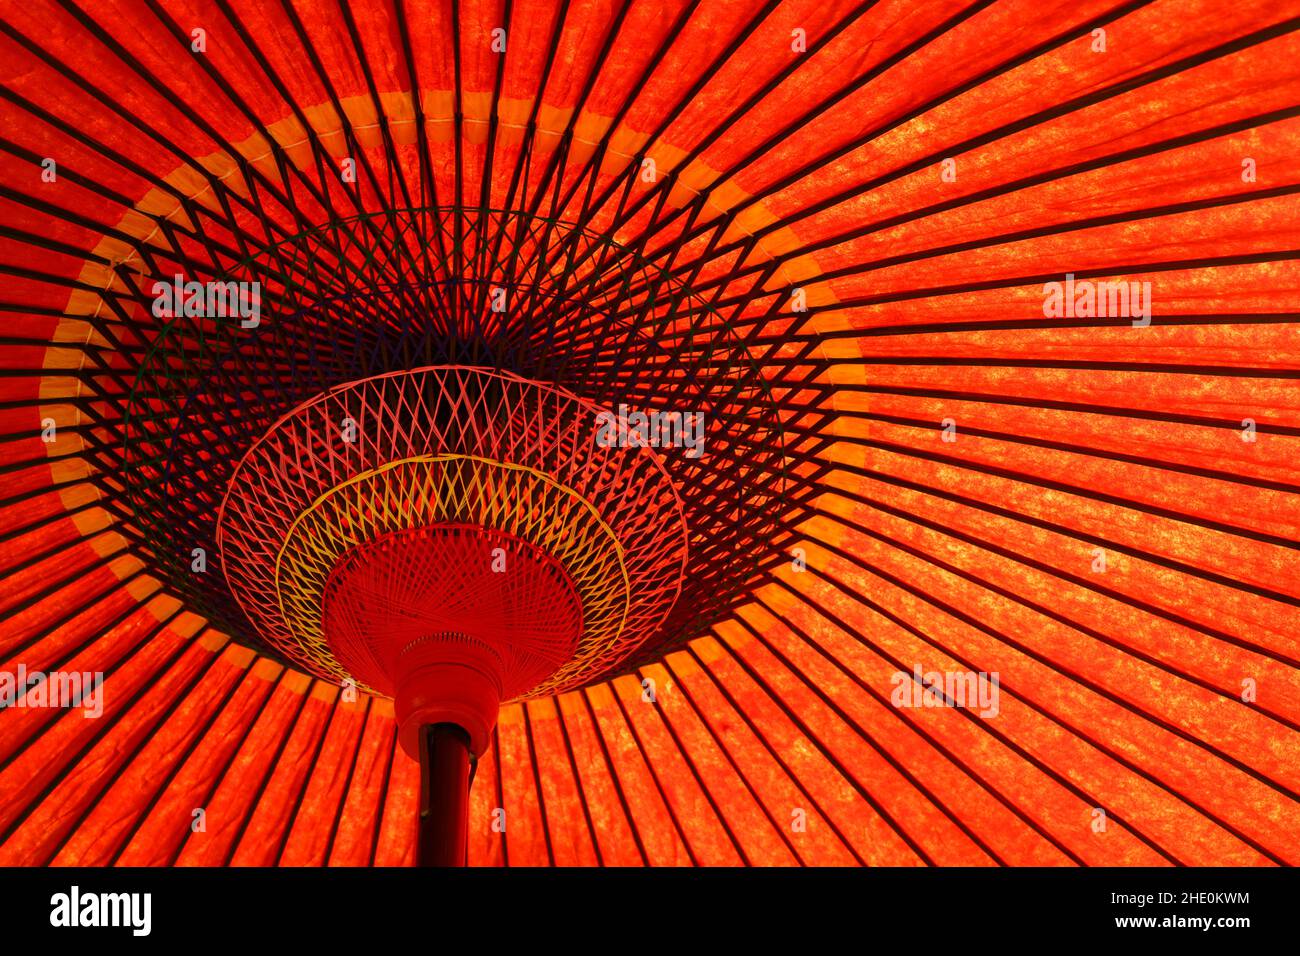 Close up photo of a bright red traditional Japanese garden sunshade umbrella Stock Photo